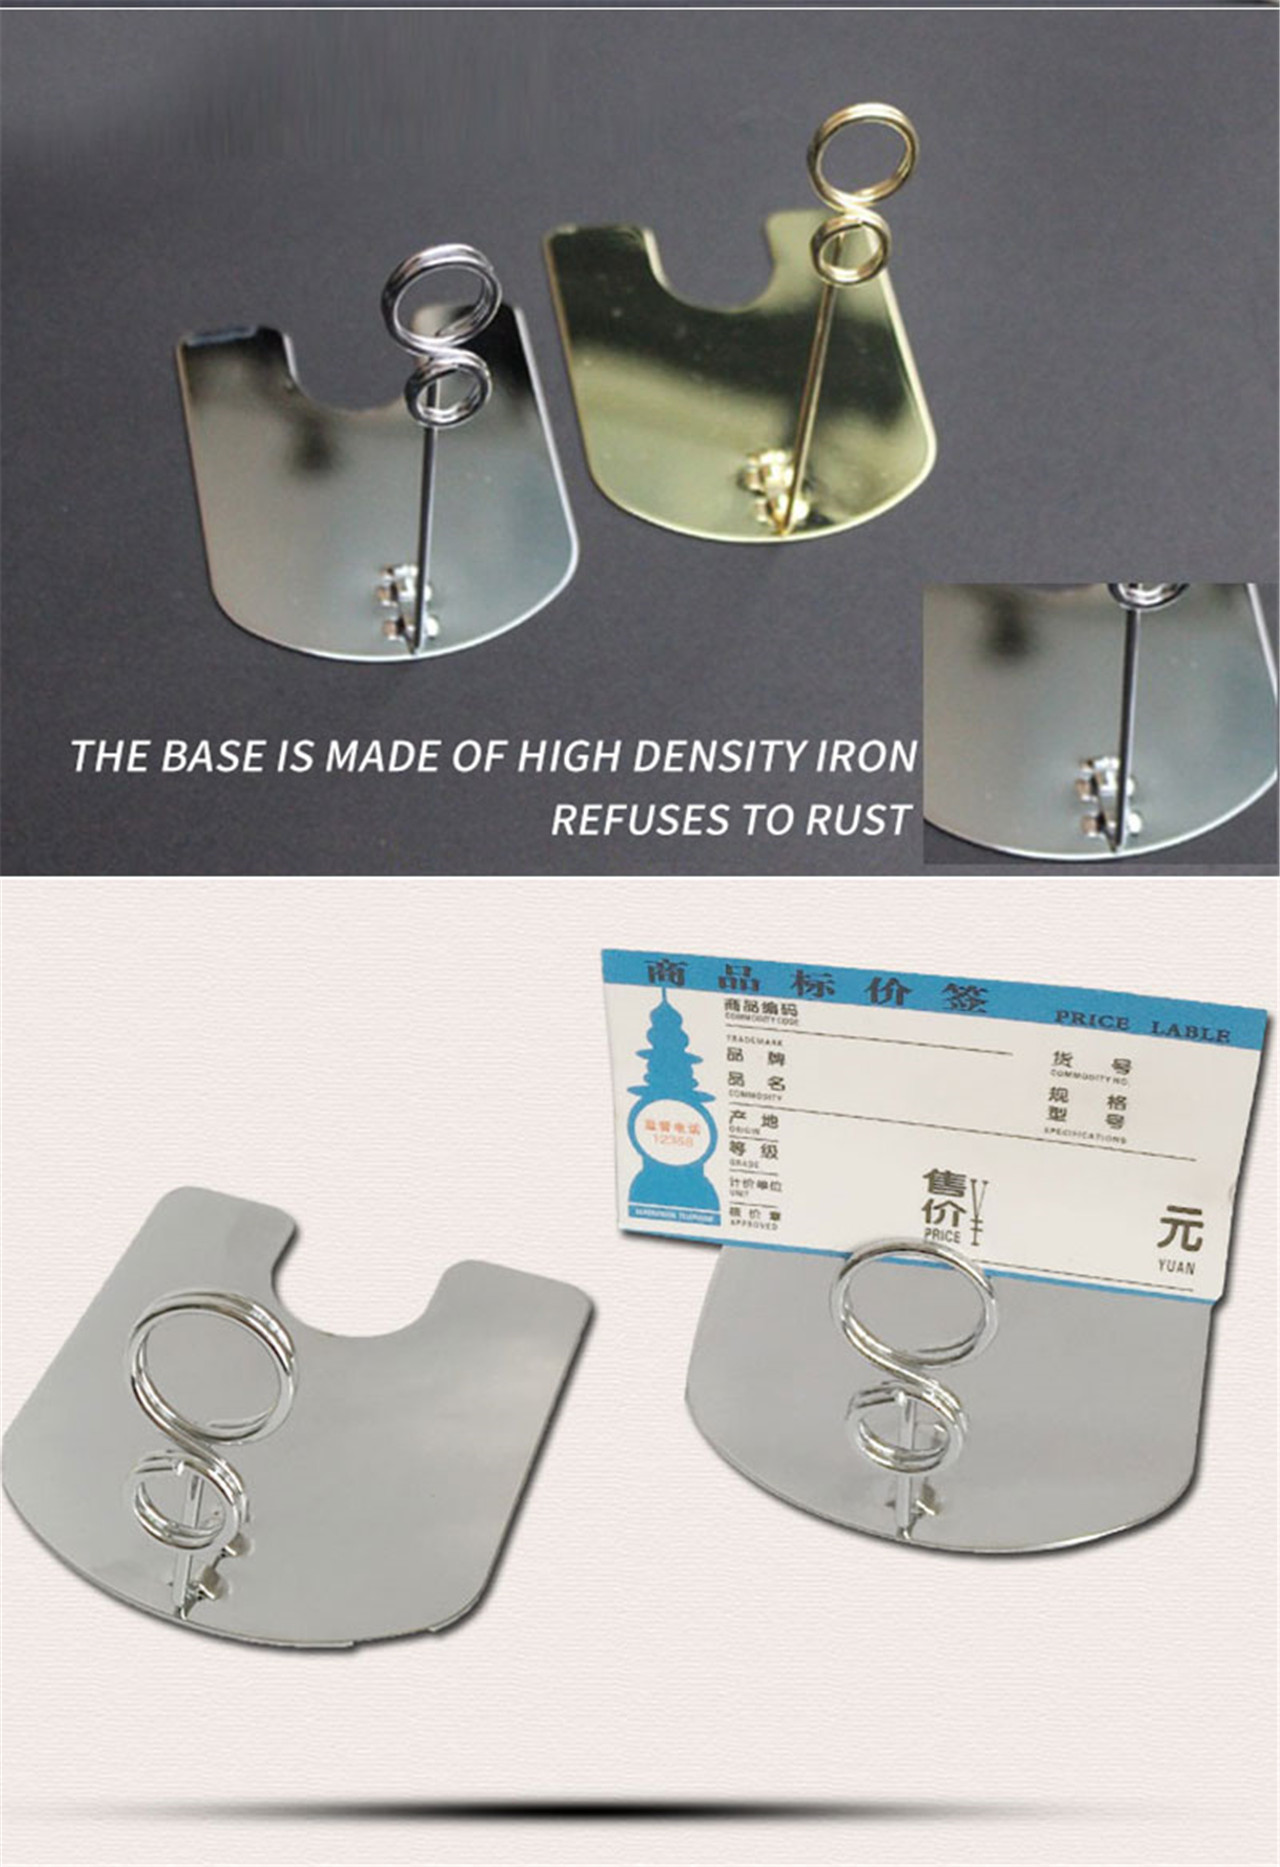 Bakery and supermarket commodity metal price or POP label clip (7)